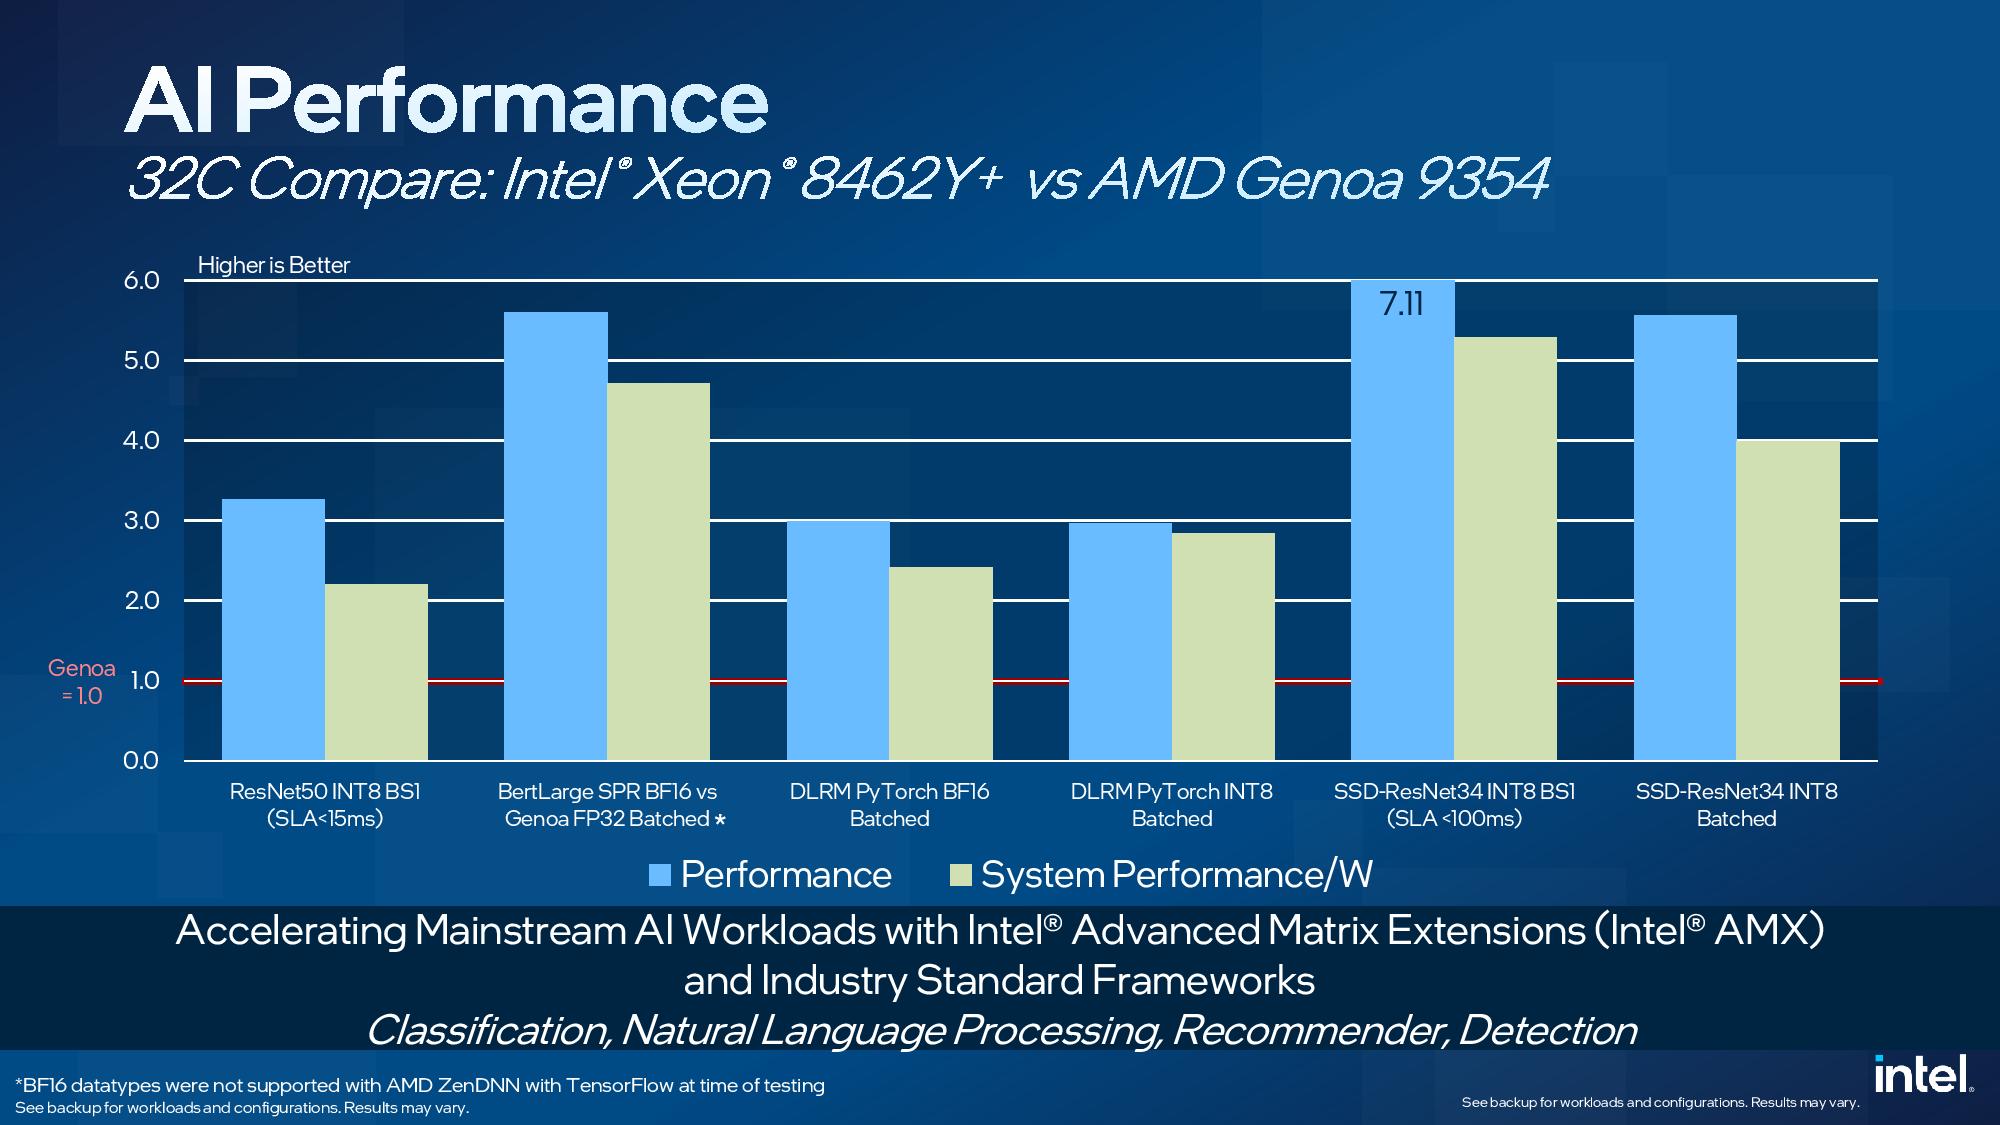 Intel Claims Sapphire Rapids up to 7X Faster Than AMD EPYC Genoa